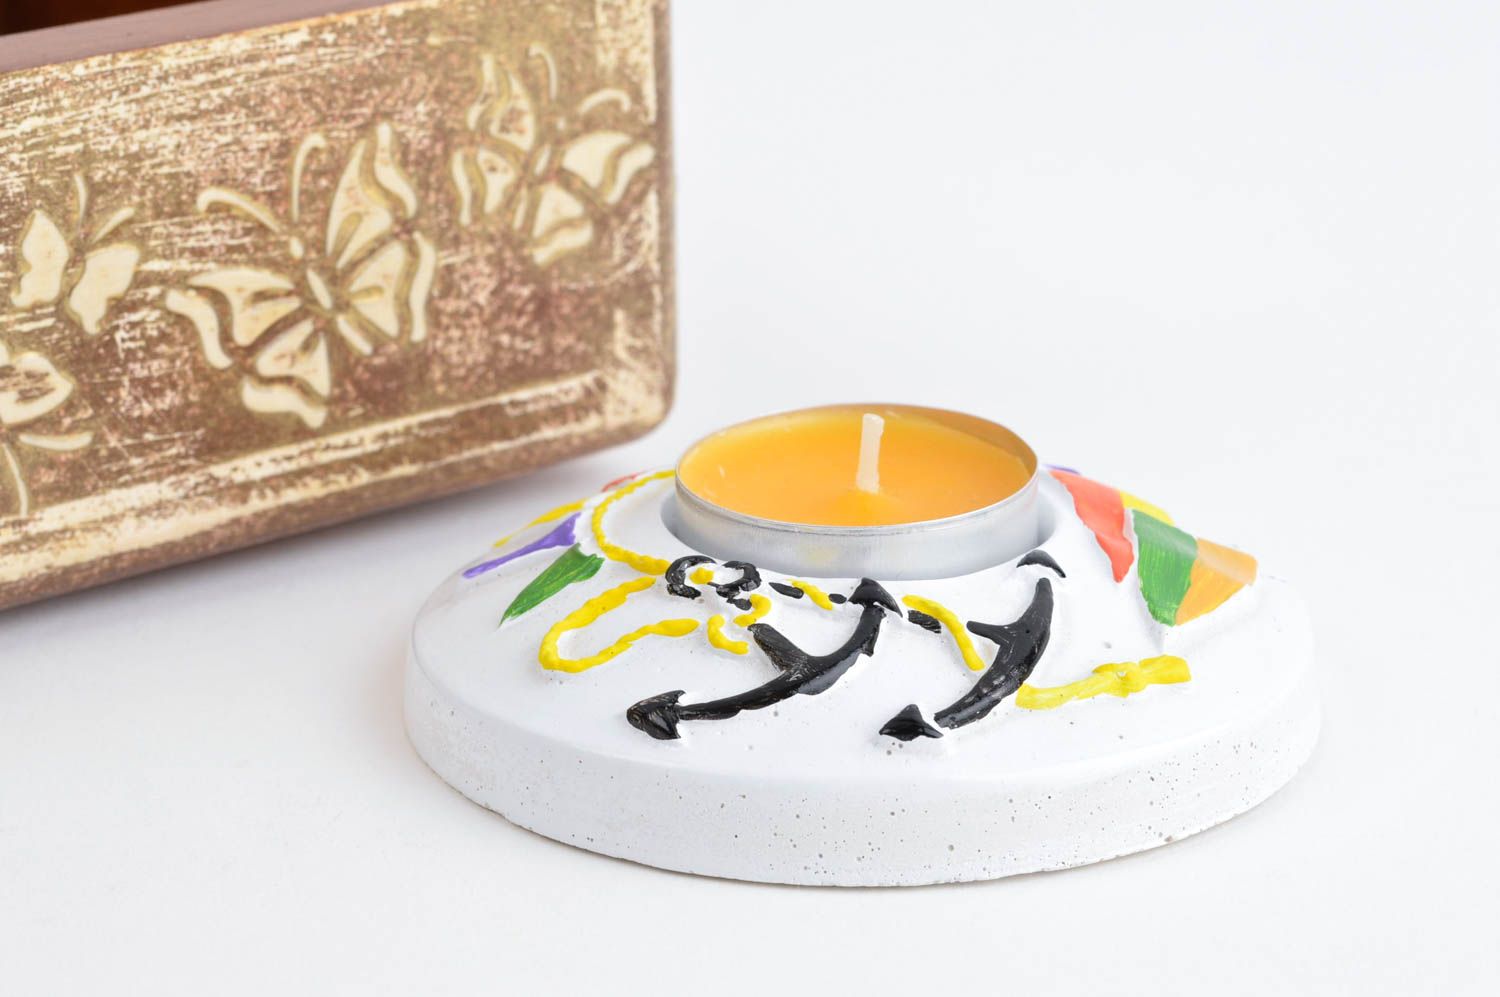 Ceramic hand-painted flat one tead light candle holder for home décor 0,79 inches photo 1